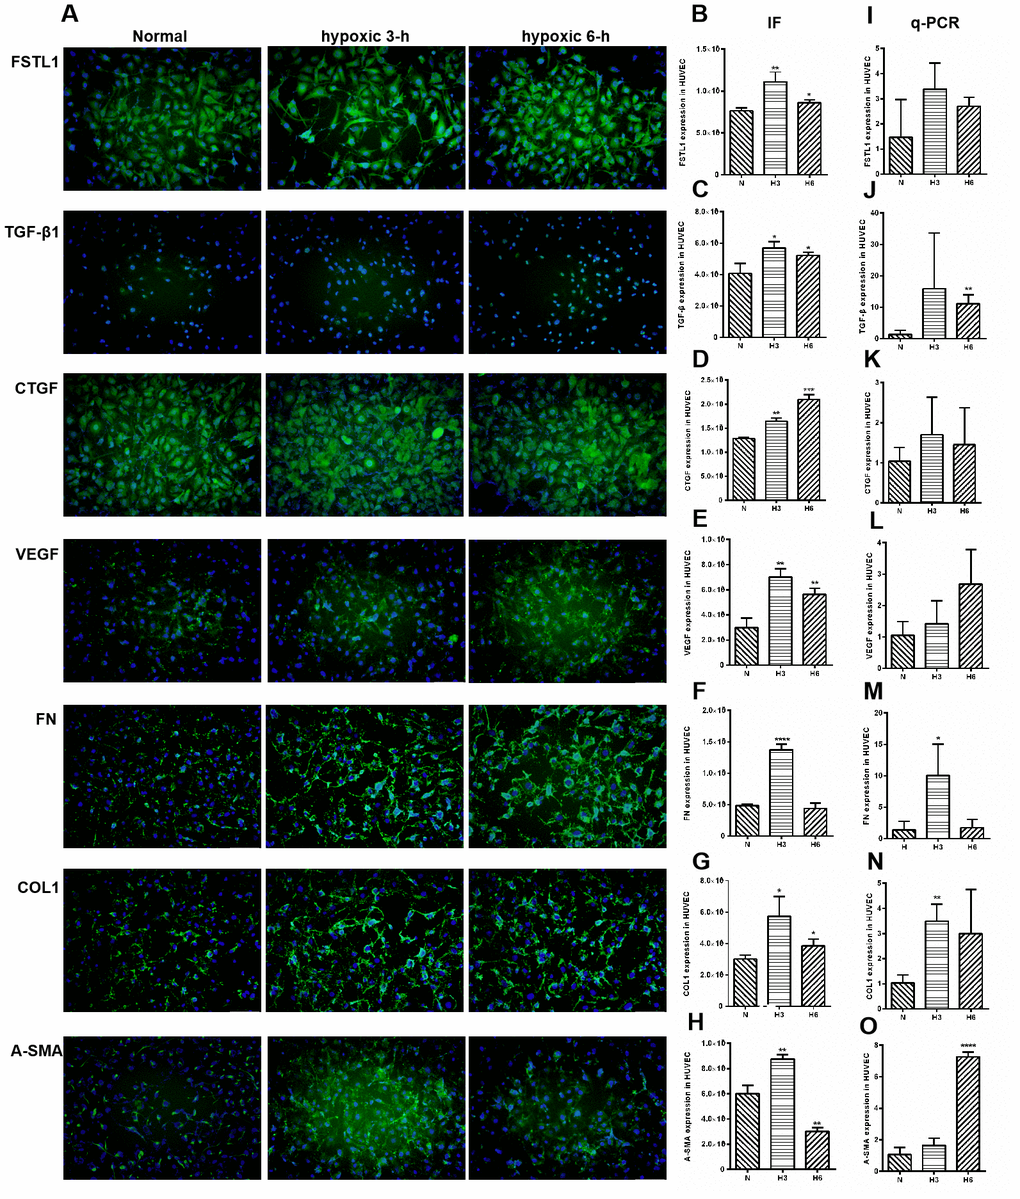 The expression of FSTL1, TGFβ, CTGF, VEGF, FN, COL1 and α-SMA in HUVECs. In Immunofluorescence figures, (A) indicates normal cell fluorescence, hypoxic 3 h cell fluorescence and hypoxic 6 h cell fluorescence (10×). (B–H) indicates the quantitative analysis of immunofluorescence figures in the normal, 3 h hypoxia, and 6 h hypoxia models using ImageJ. The 3 h and 6 h hypoxia results indicated that FSTL1, TGFβ1, CTGF, VEGF, FN, COL1, and α-SMA were expressed at significantly higher levels than in normal cells. (I–O) indicates that the mRNA expression of FSTL1 and ECM-related factors in the three models. The expression of FSTL1, TGFβ1, CTGF, VEGF, FN, COL1, and α-SMA mRNA in 3 h and 6 h hypoxia conditions, respectively, were expressed at significantly higher levels than in normal cells (N: normal, h3: 3 h hypoxia, h6: 6 h hypoxia). Data are expressed as mean ± SEM. * means P 